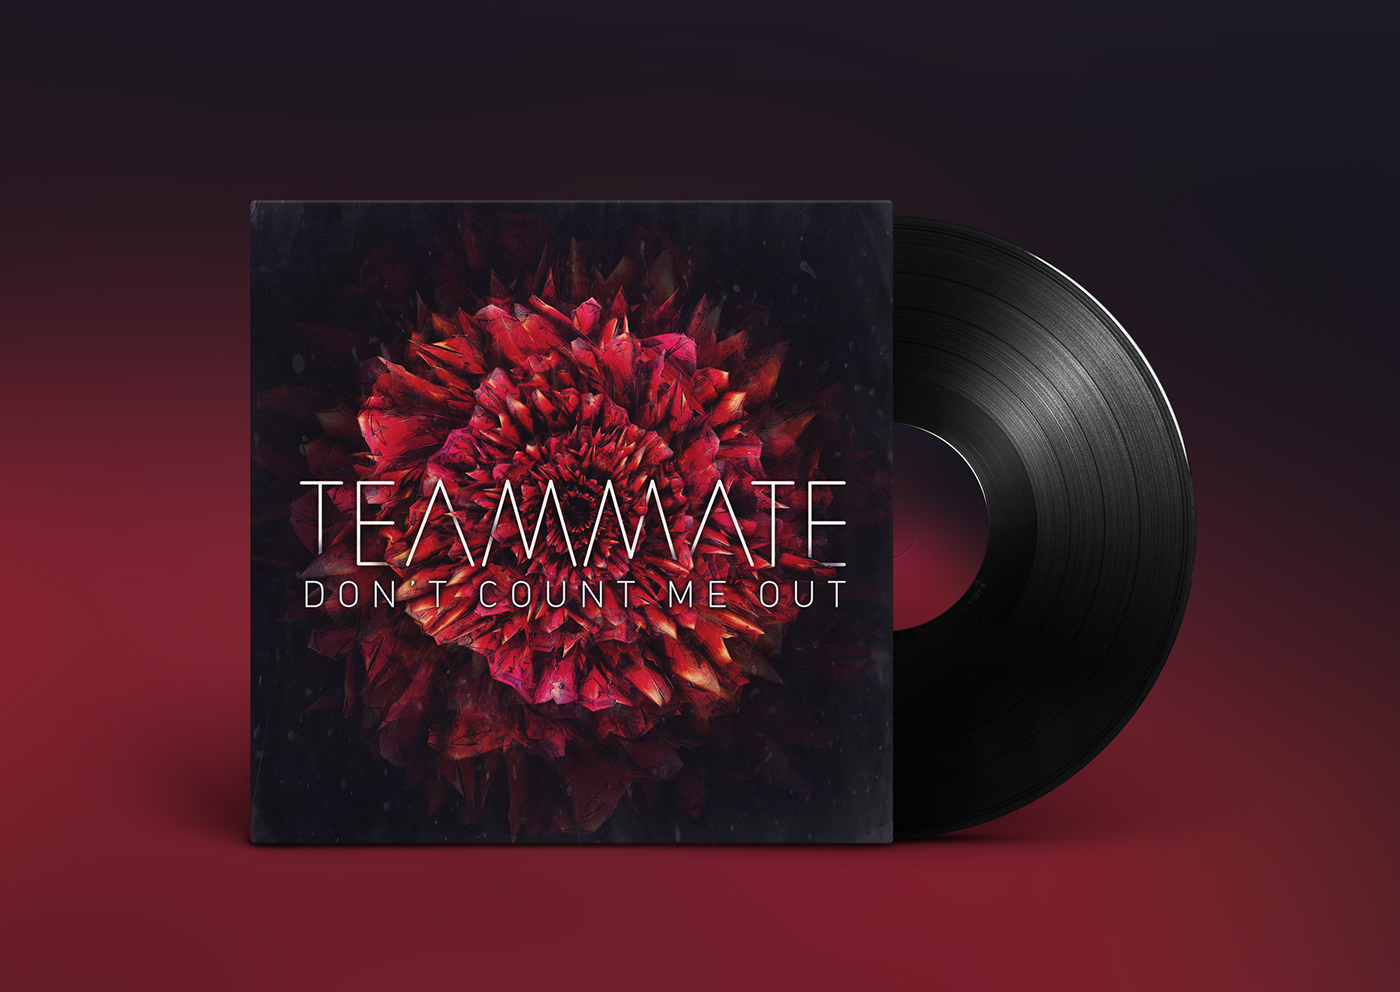 rostrum Records team mate teammate dont count me out Single cover artwork flower floral rose